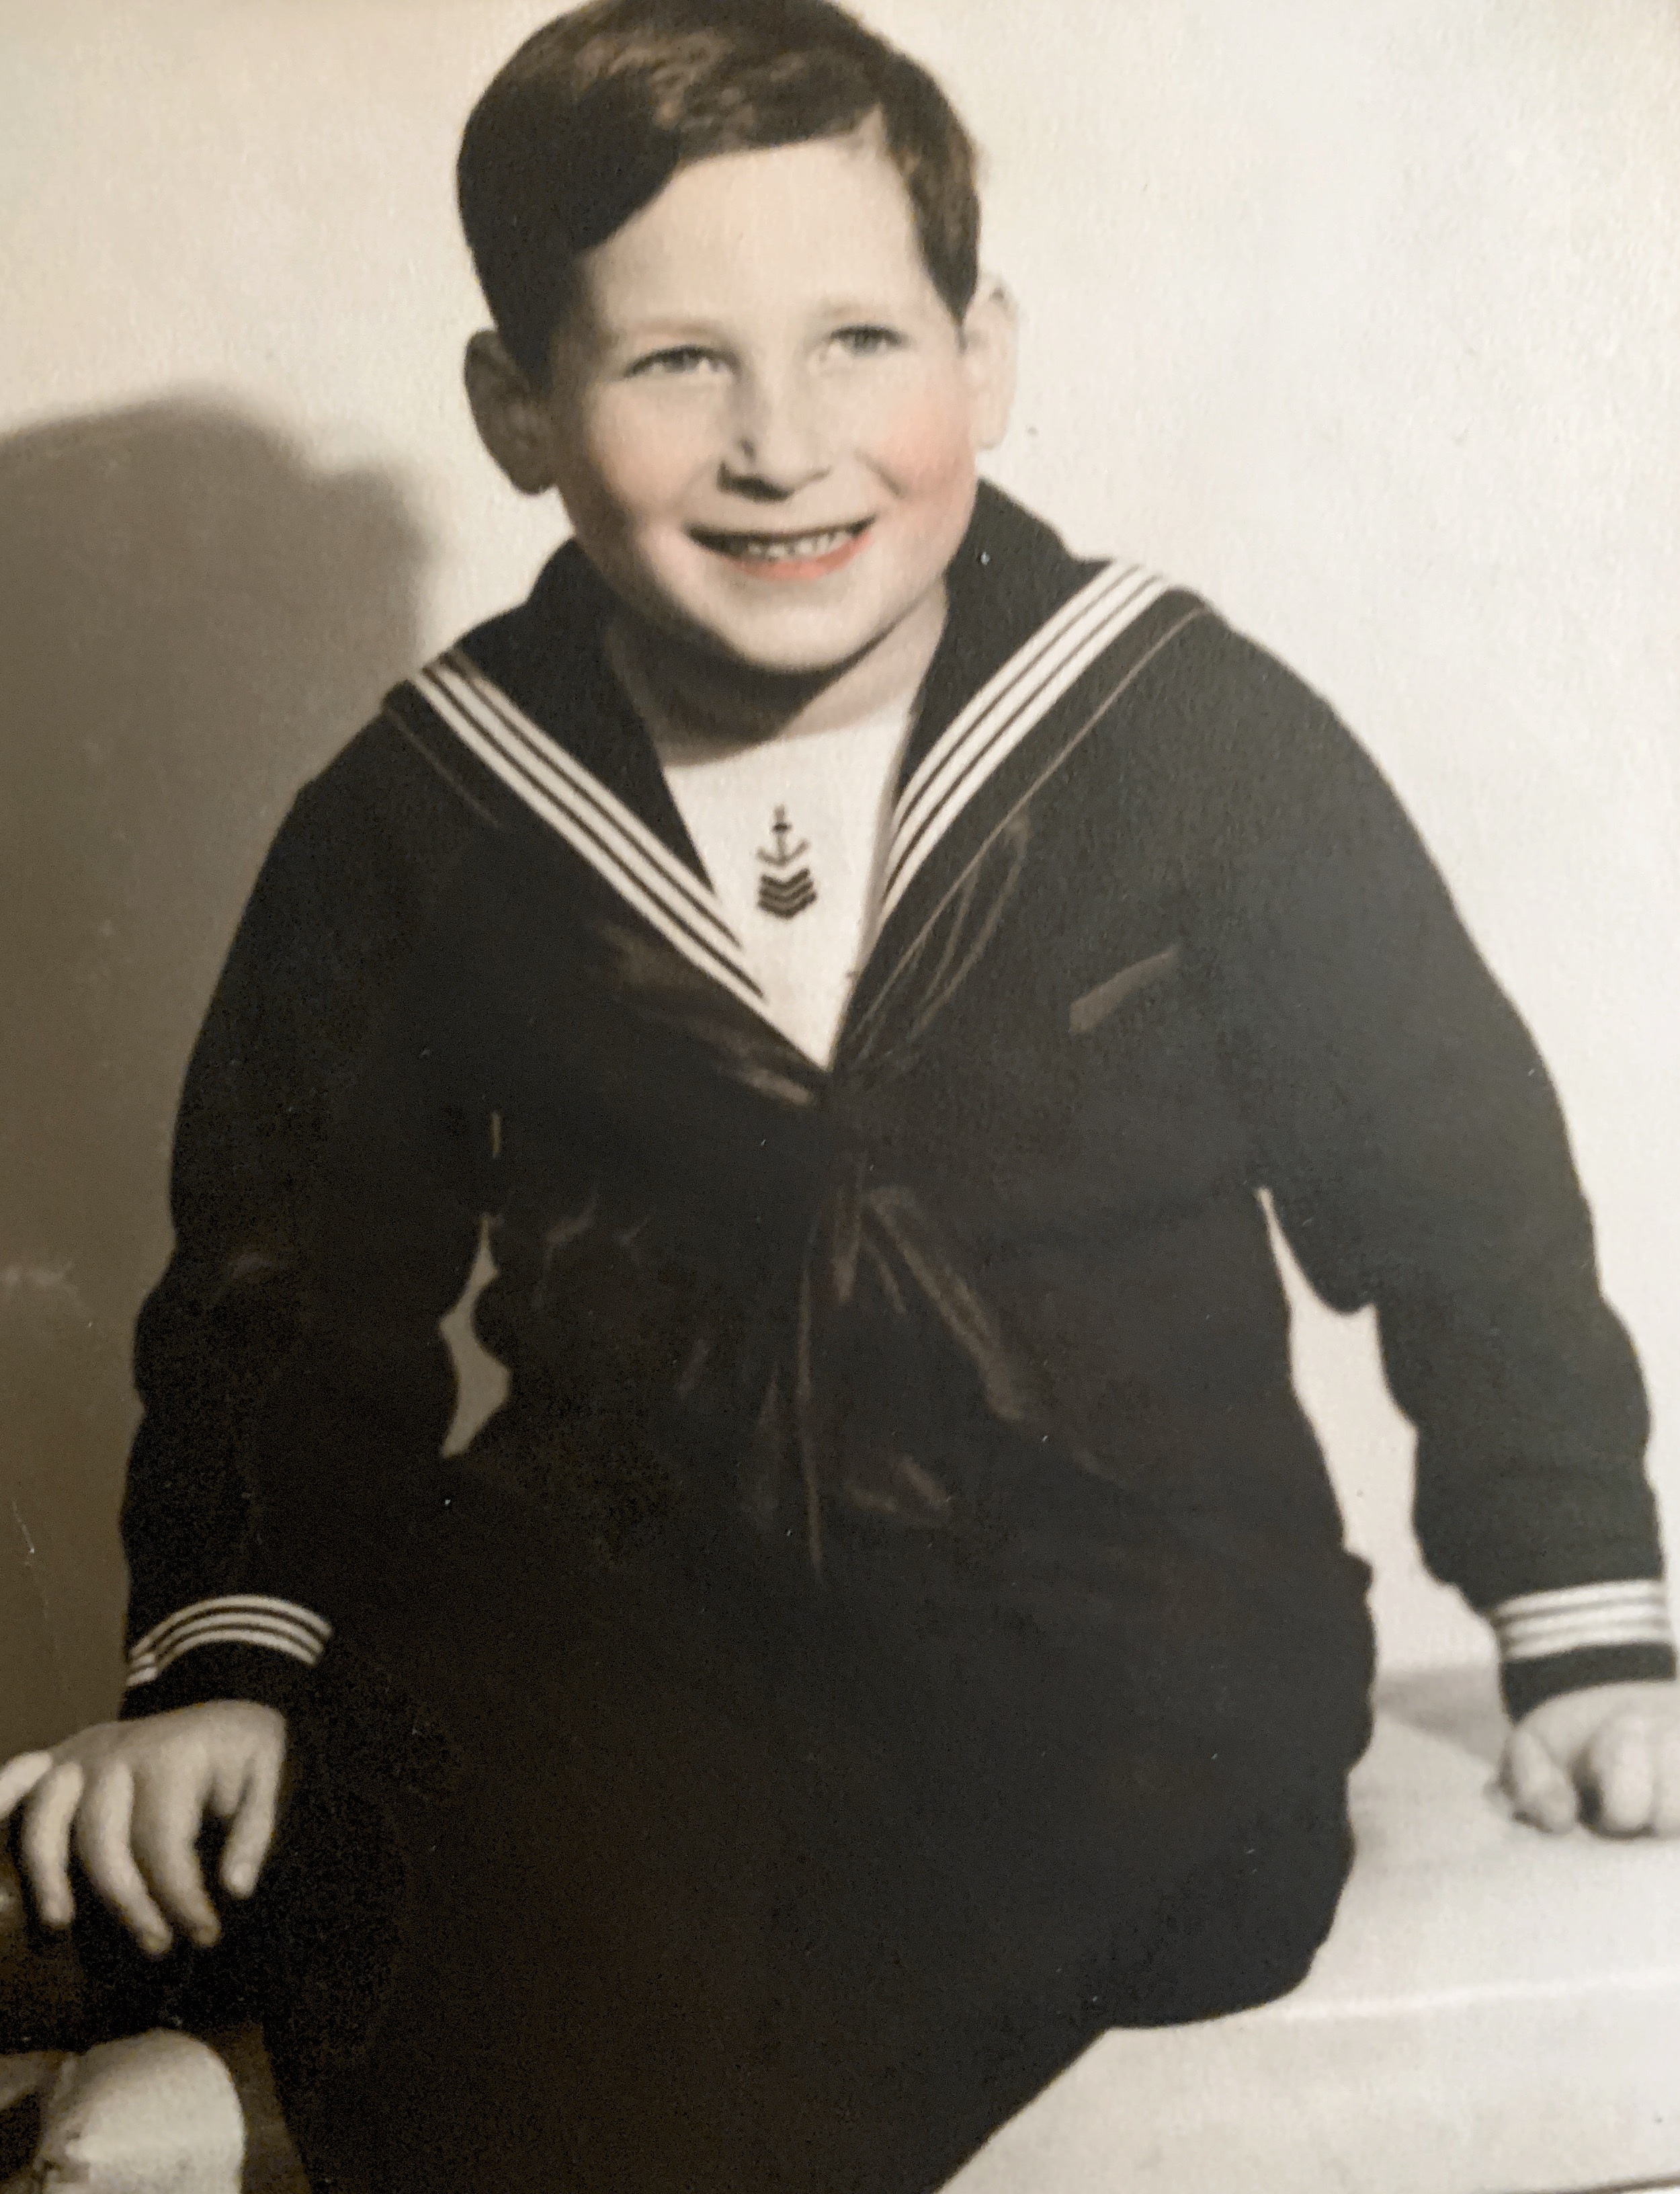 My husband as a young boy. Probably taken around 1941 